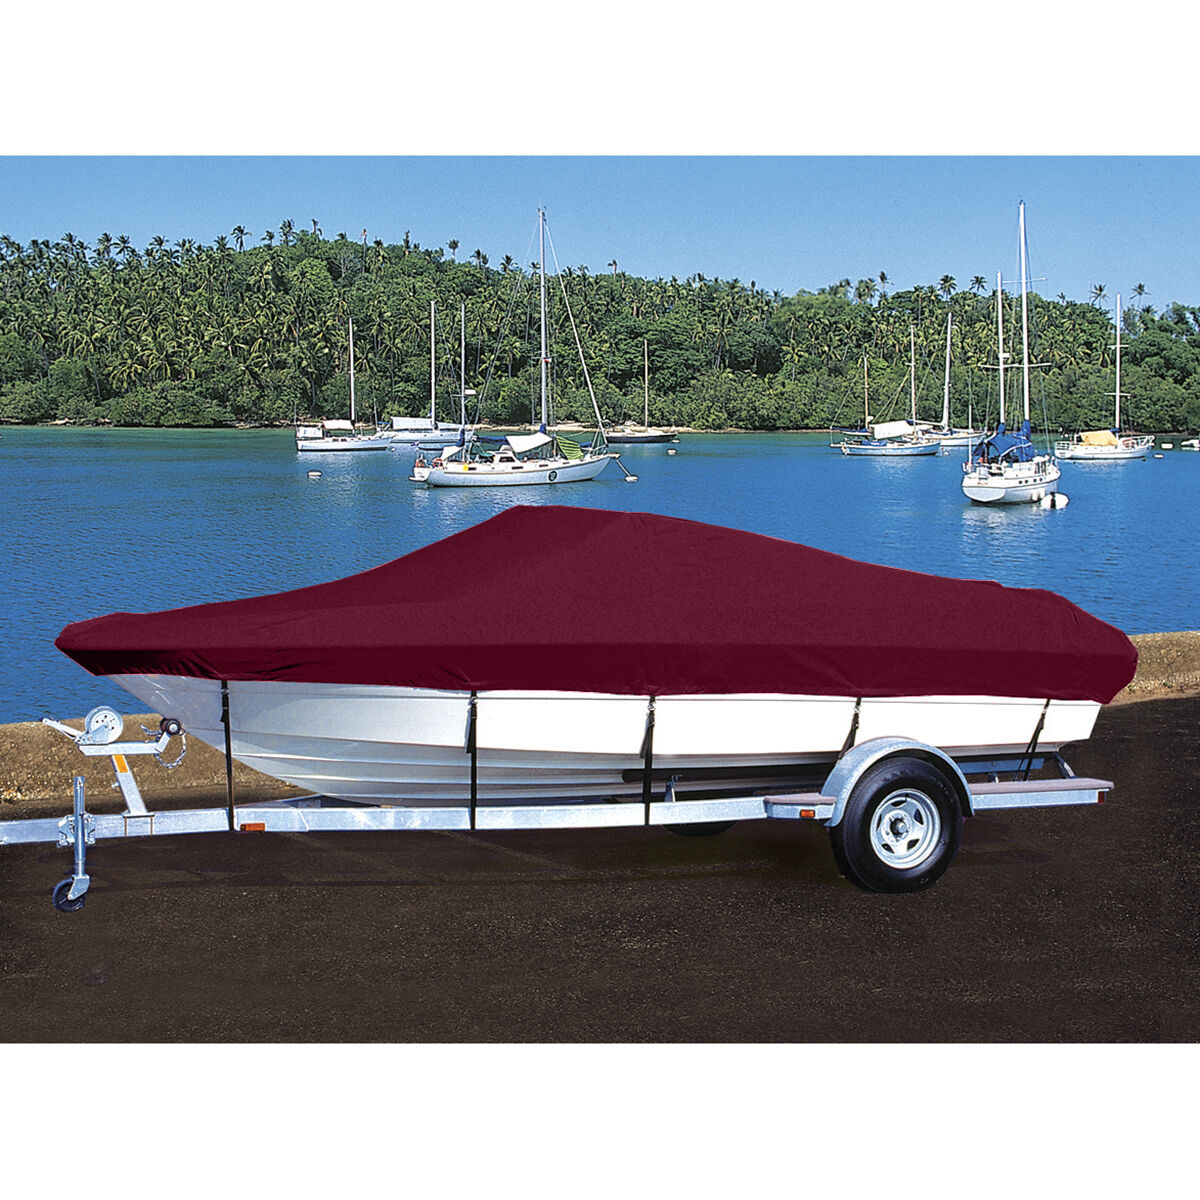 Taylor Made Trailerite Hot Shot Cover for 92-96 Sea Swirl 180 SE Bow Rider I/O Boat Cover in Cranberry Polyester